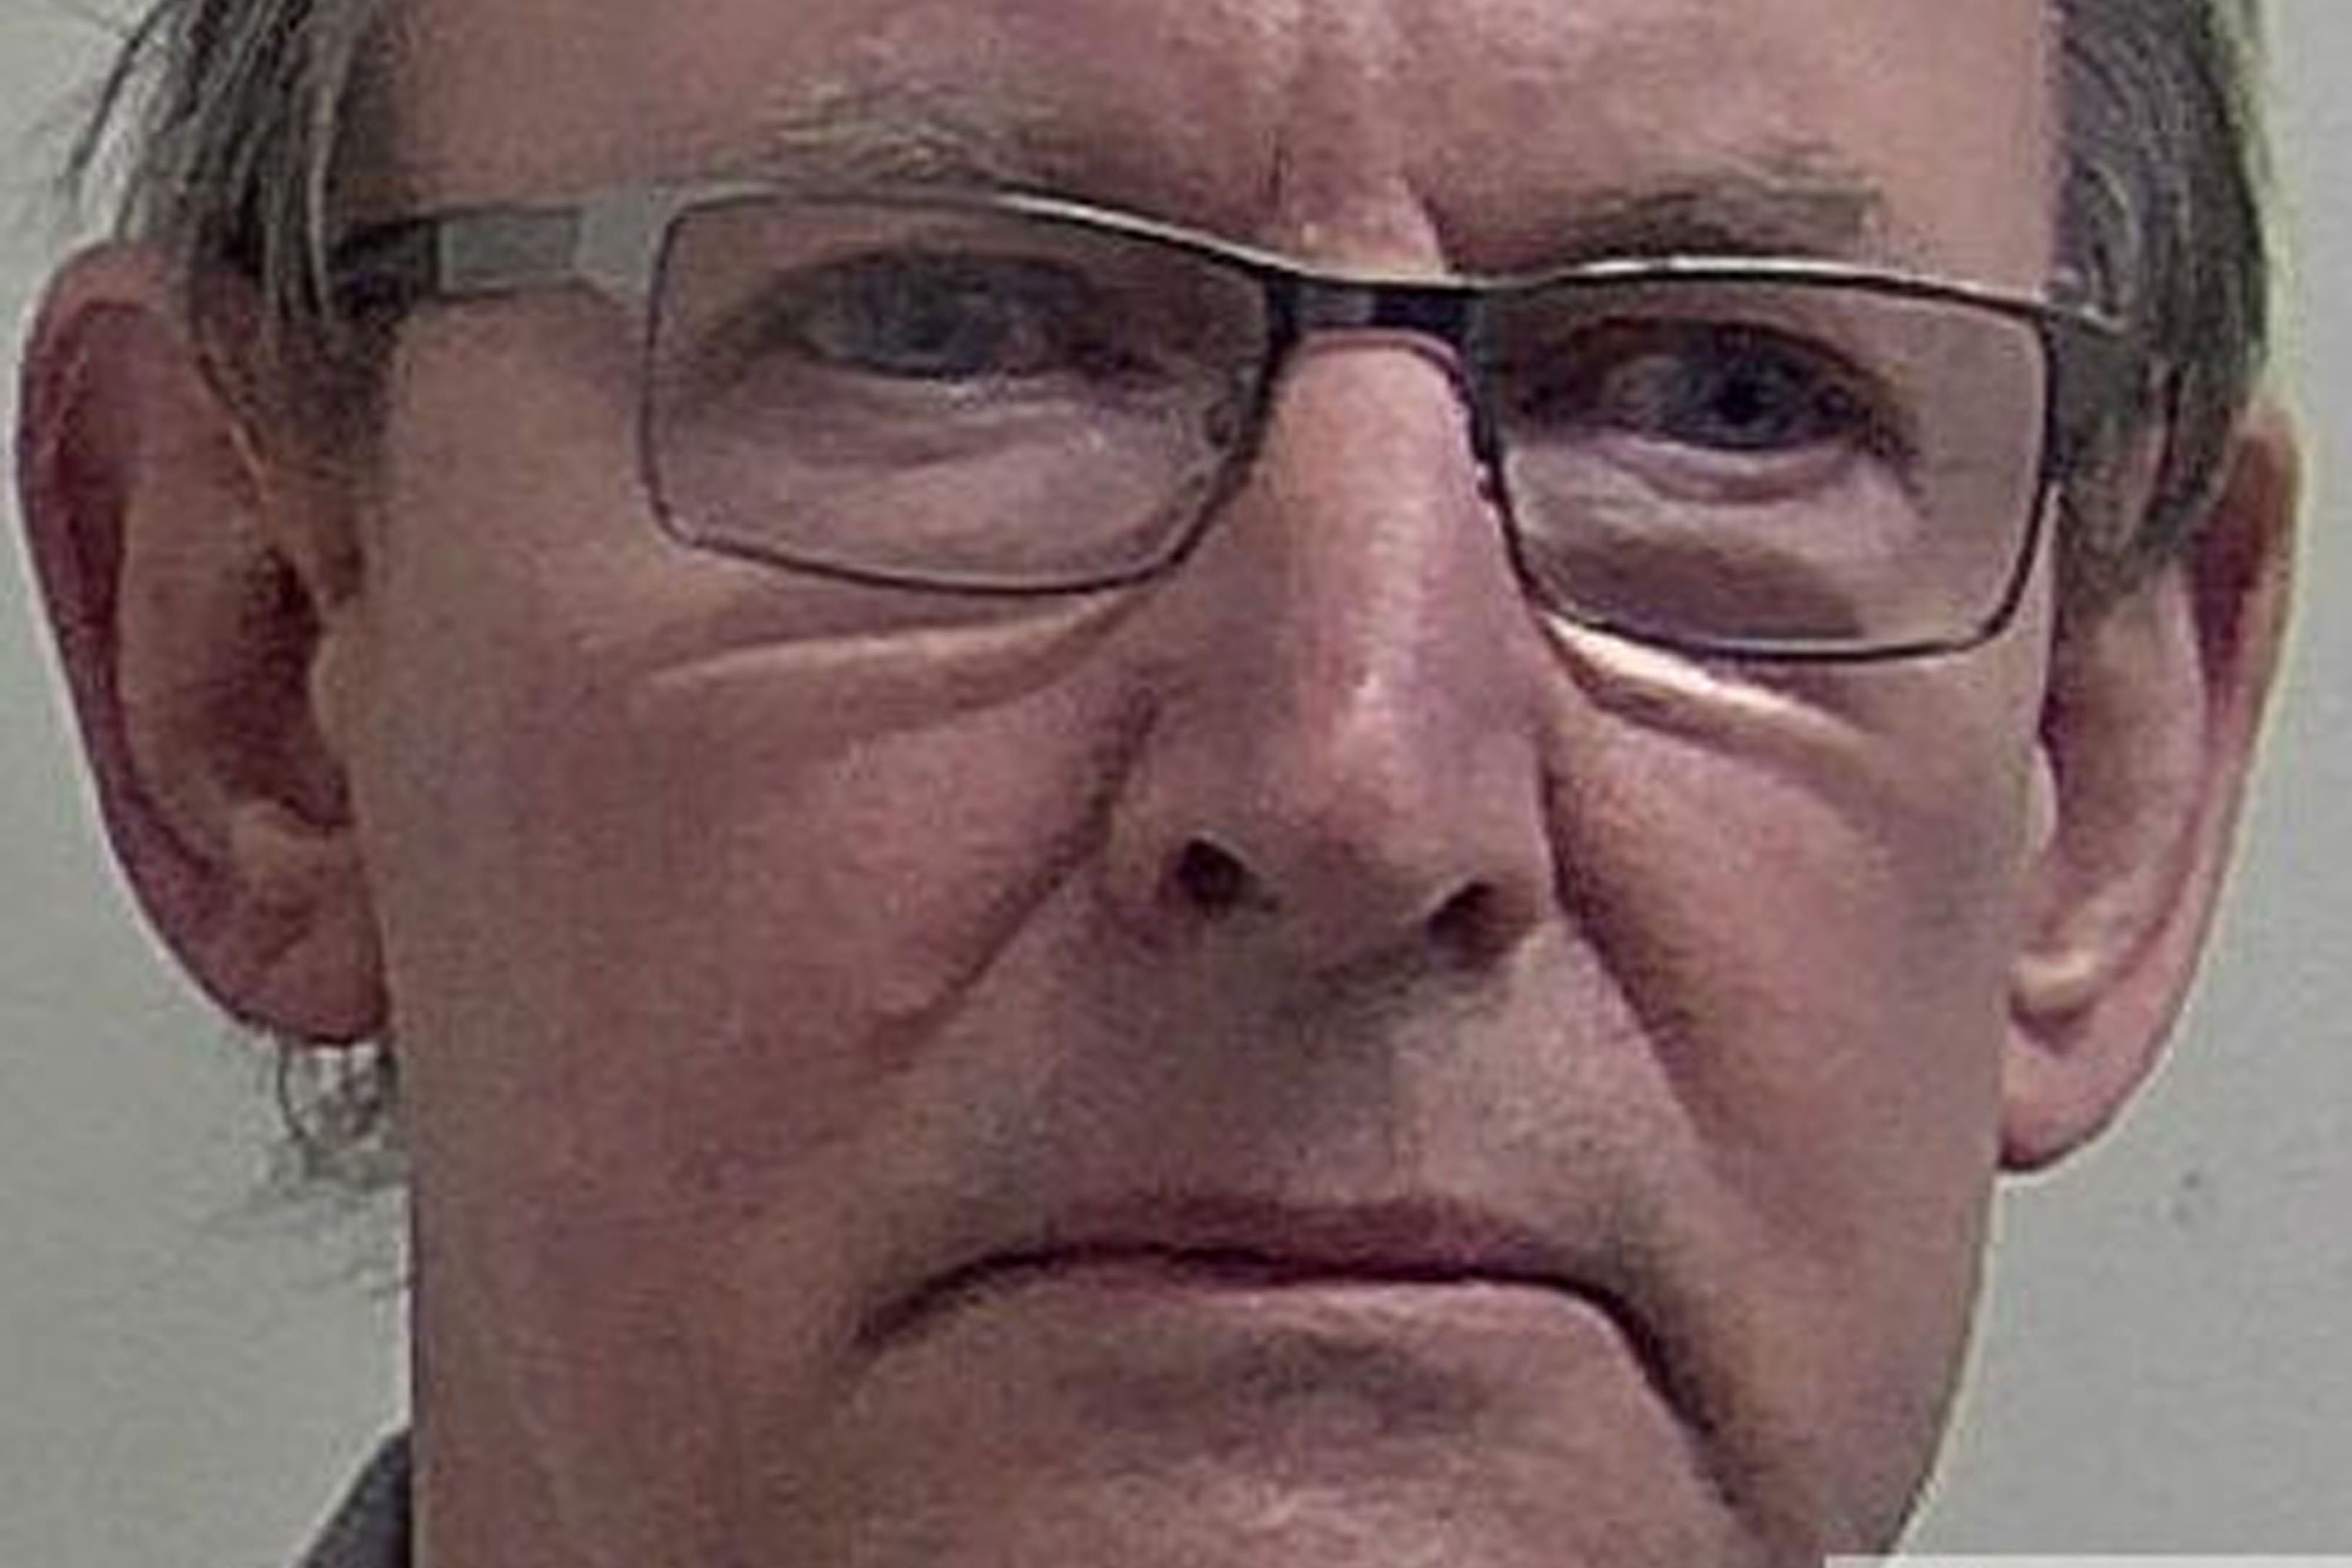 david fuller, tunbridge wells, david fuller: nhs failings enabled necrophiliac to sexually abuse bodies for 15 years without being caught